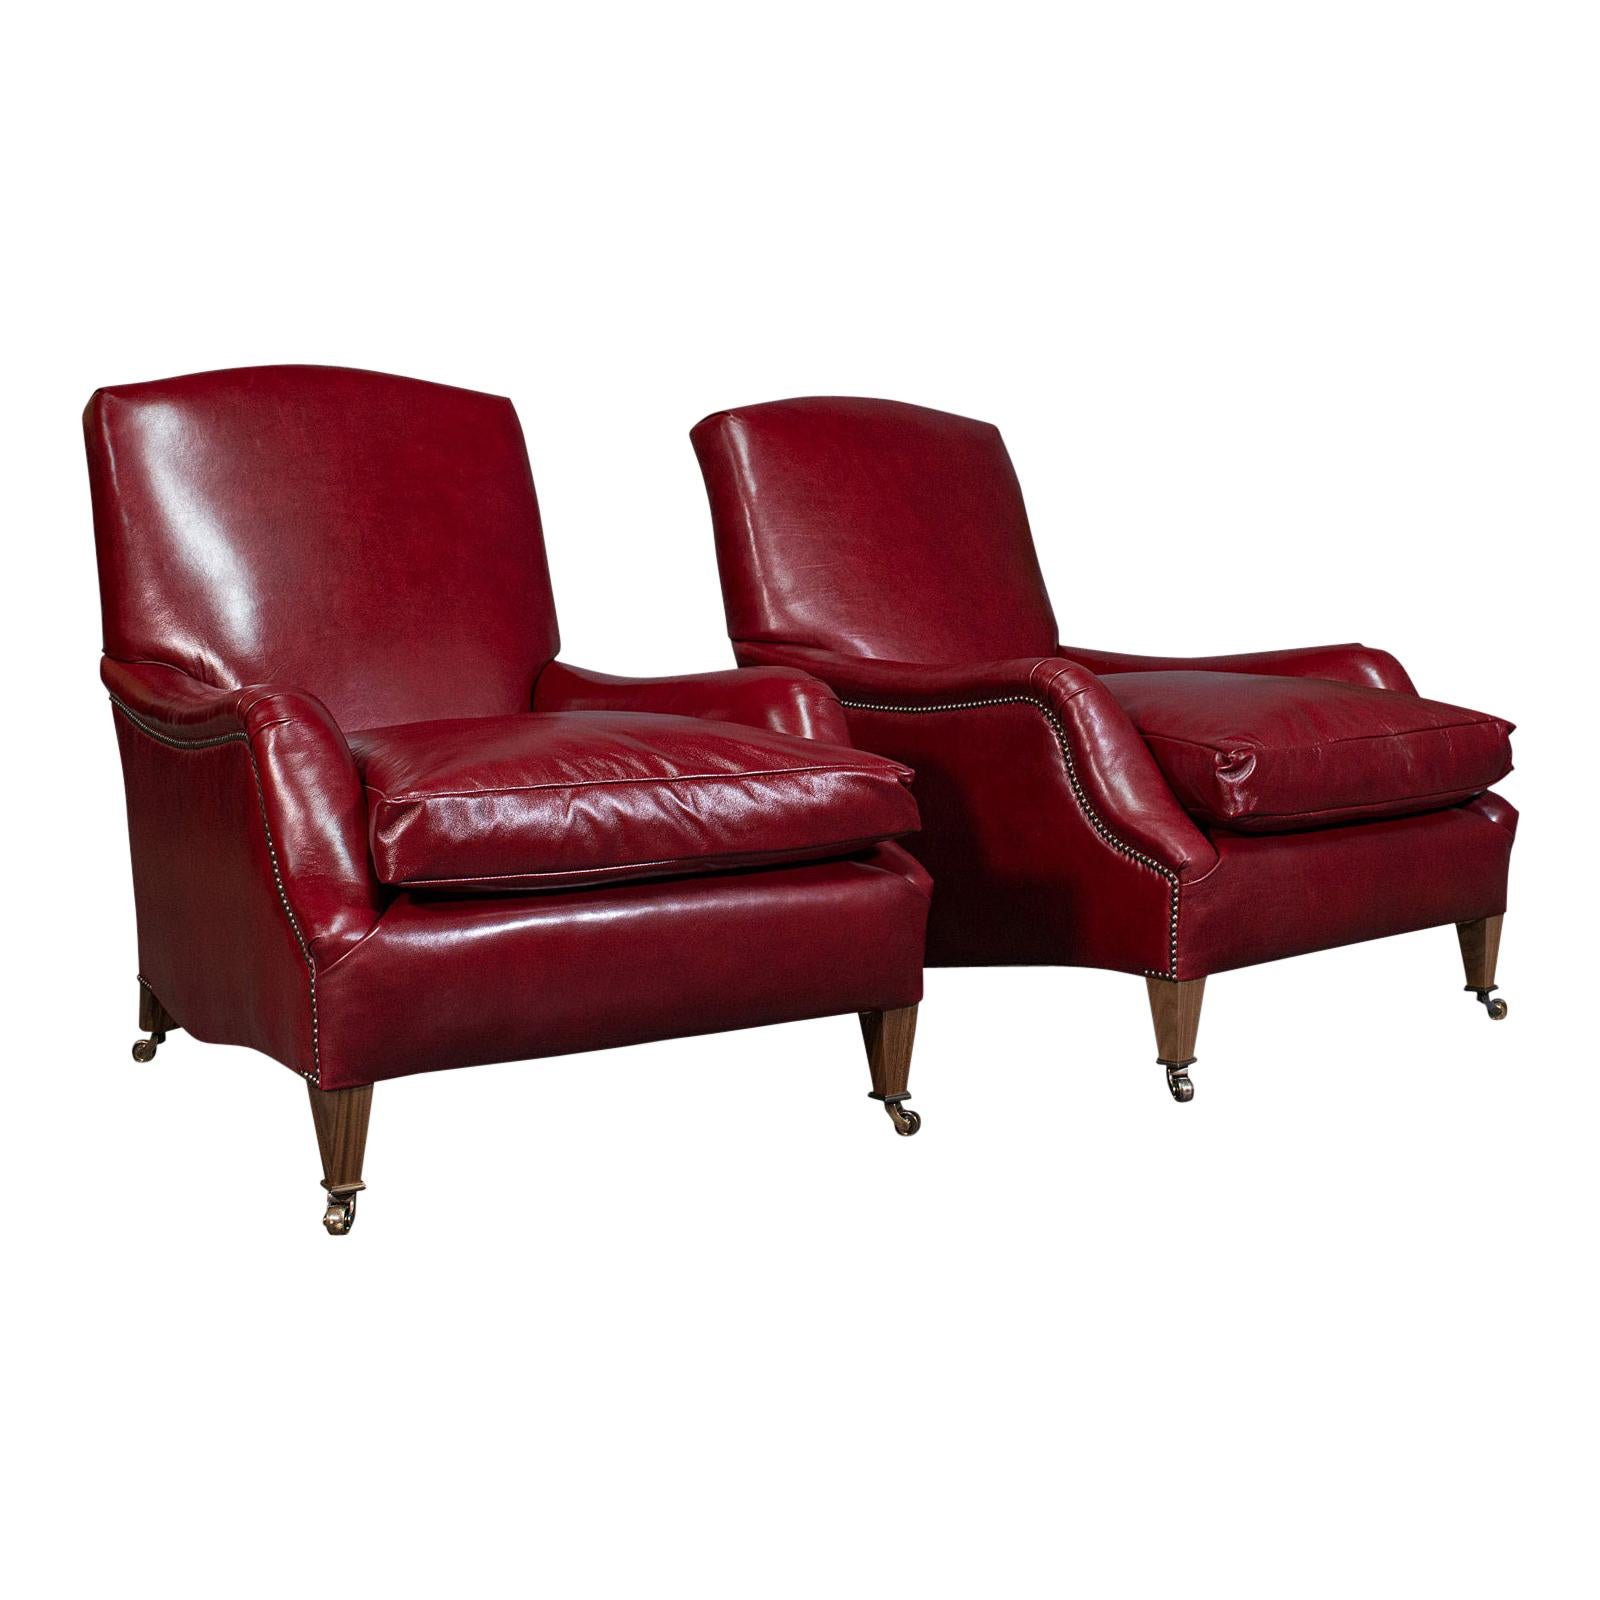 Pair of Bespoke Leather, Club Armchairs, 'The Dutchman', Chairs by London Fine For Sale